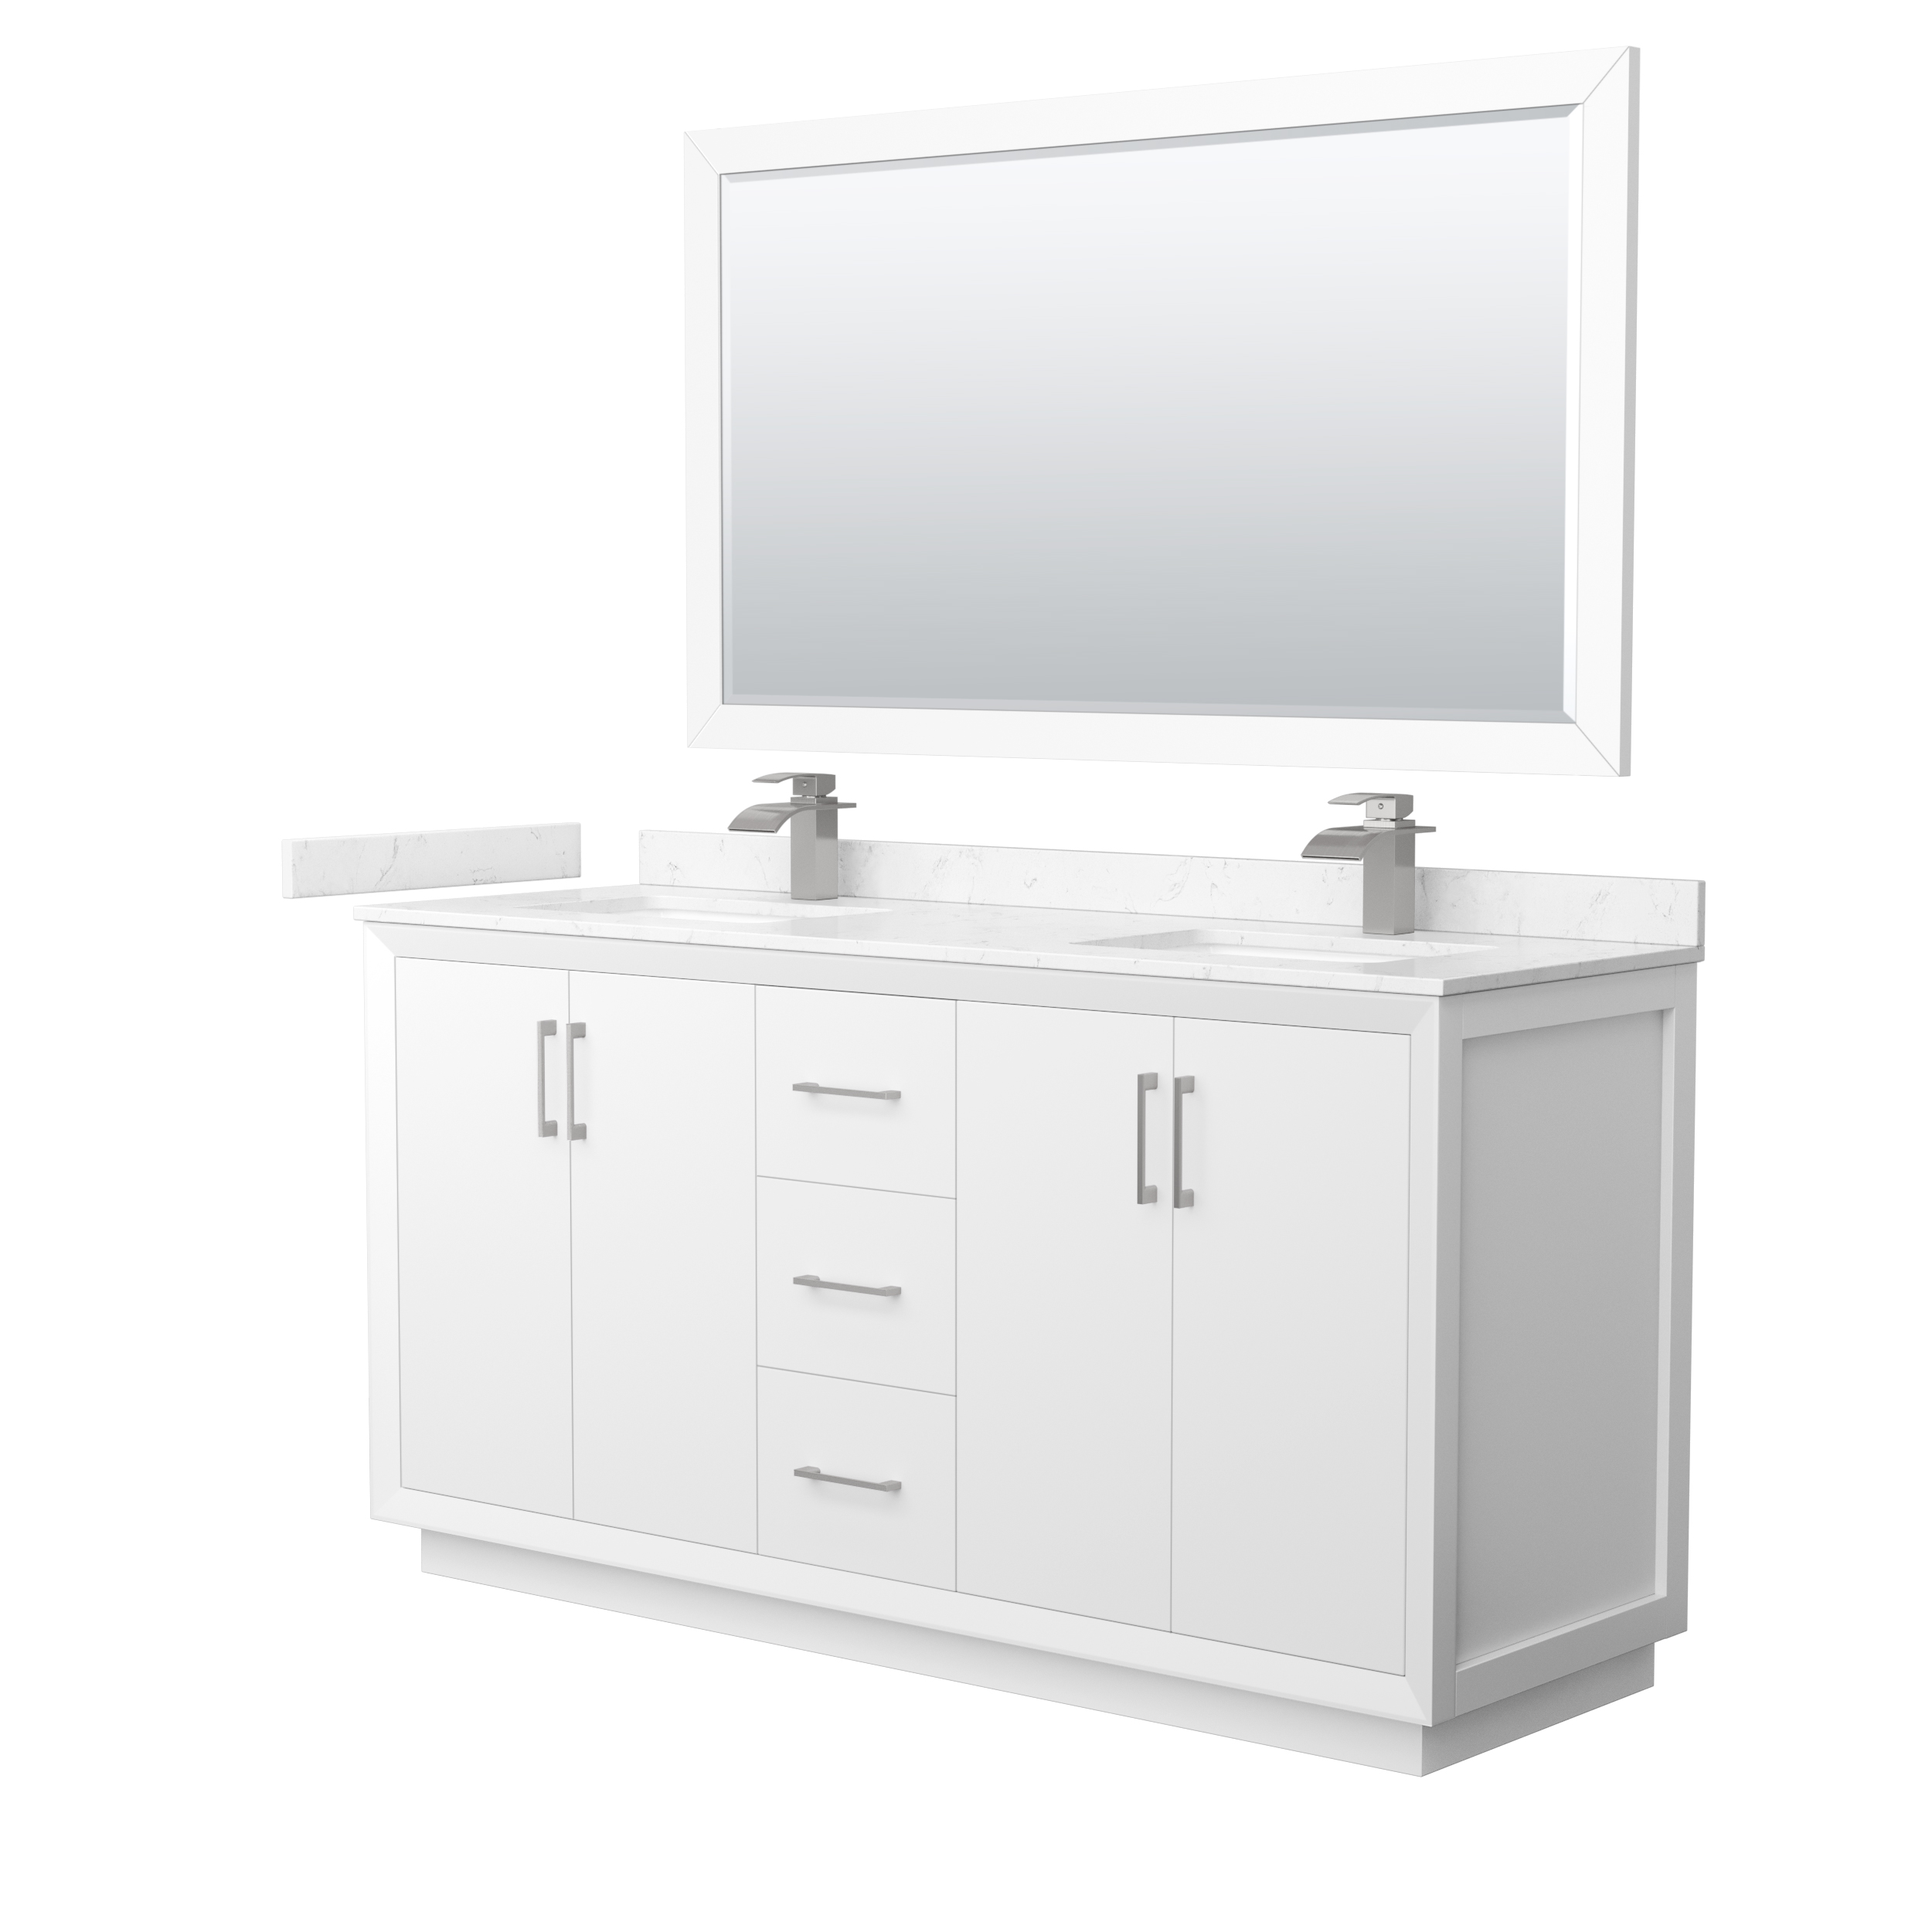 66" Transitional Double Vanity Base in White, 3 Top Option, with 3 Hardware Options and Mirror Option